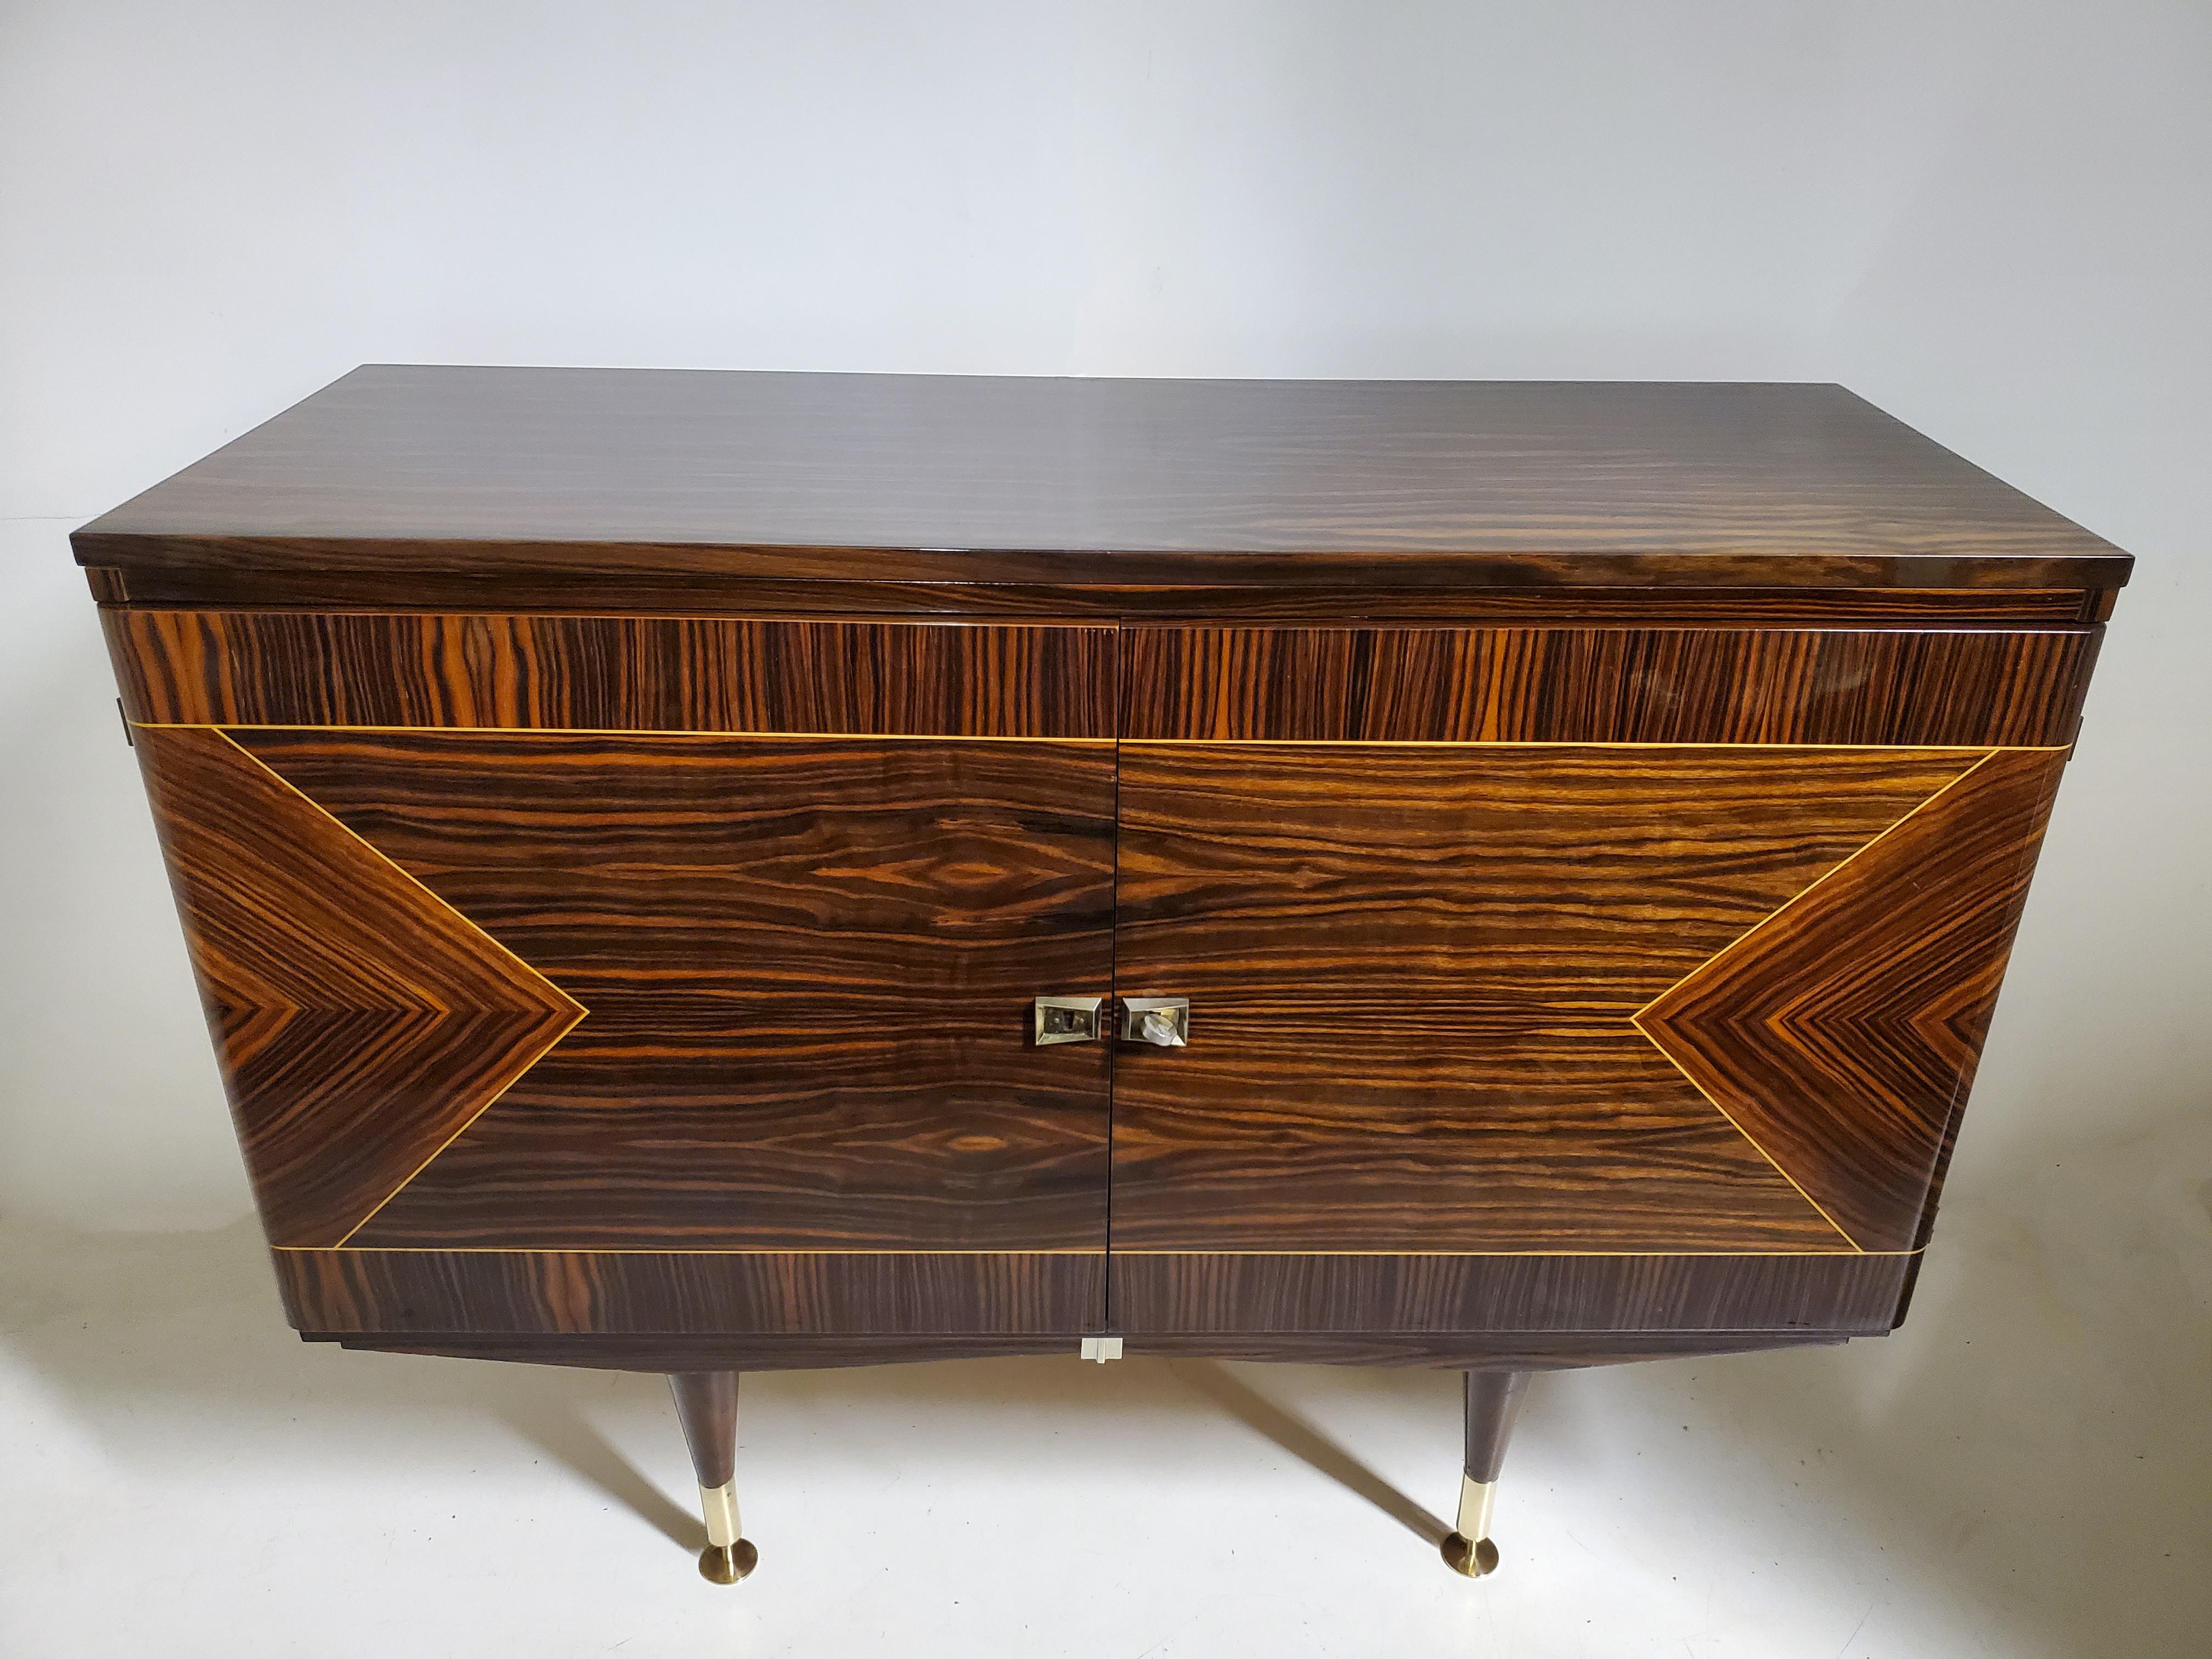 A petite scaled, macassar ebony vintage cabinet with double doors, featuring parquetry inlaid triangular, arrow like patterns flanking the sides of each door. 
The cabinet, angular and cubist in feeling is raised on tapered legs ending with brass